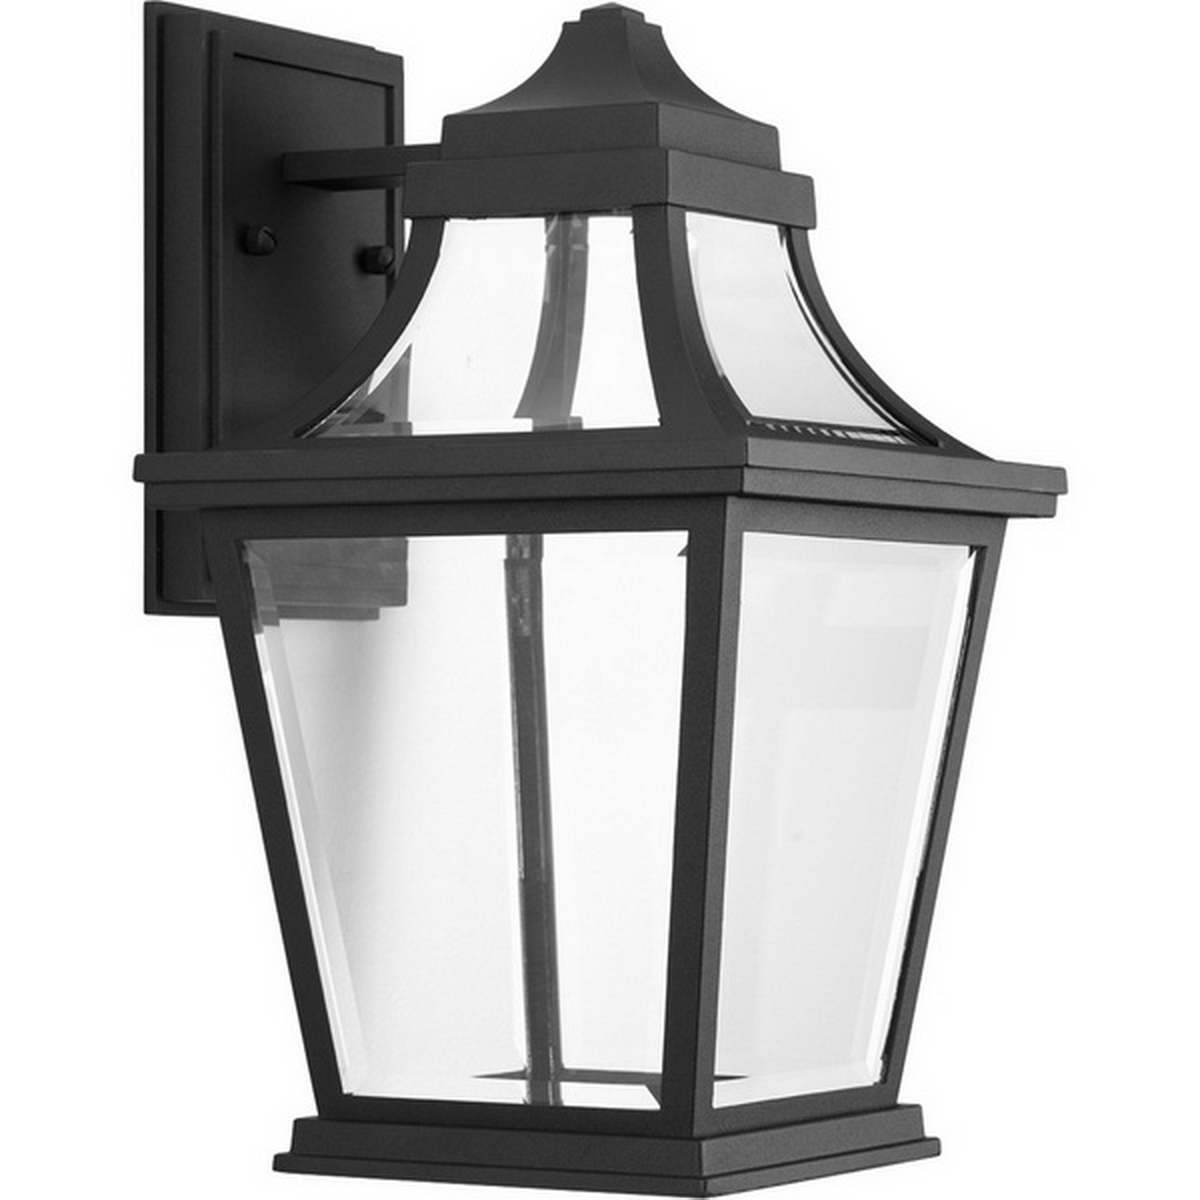 Endorse 15 in. LED Outdoor Wall Light 623 Lumens 3000K Black Finish